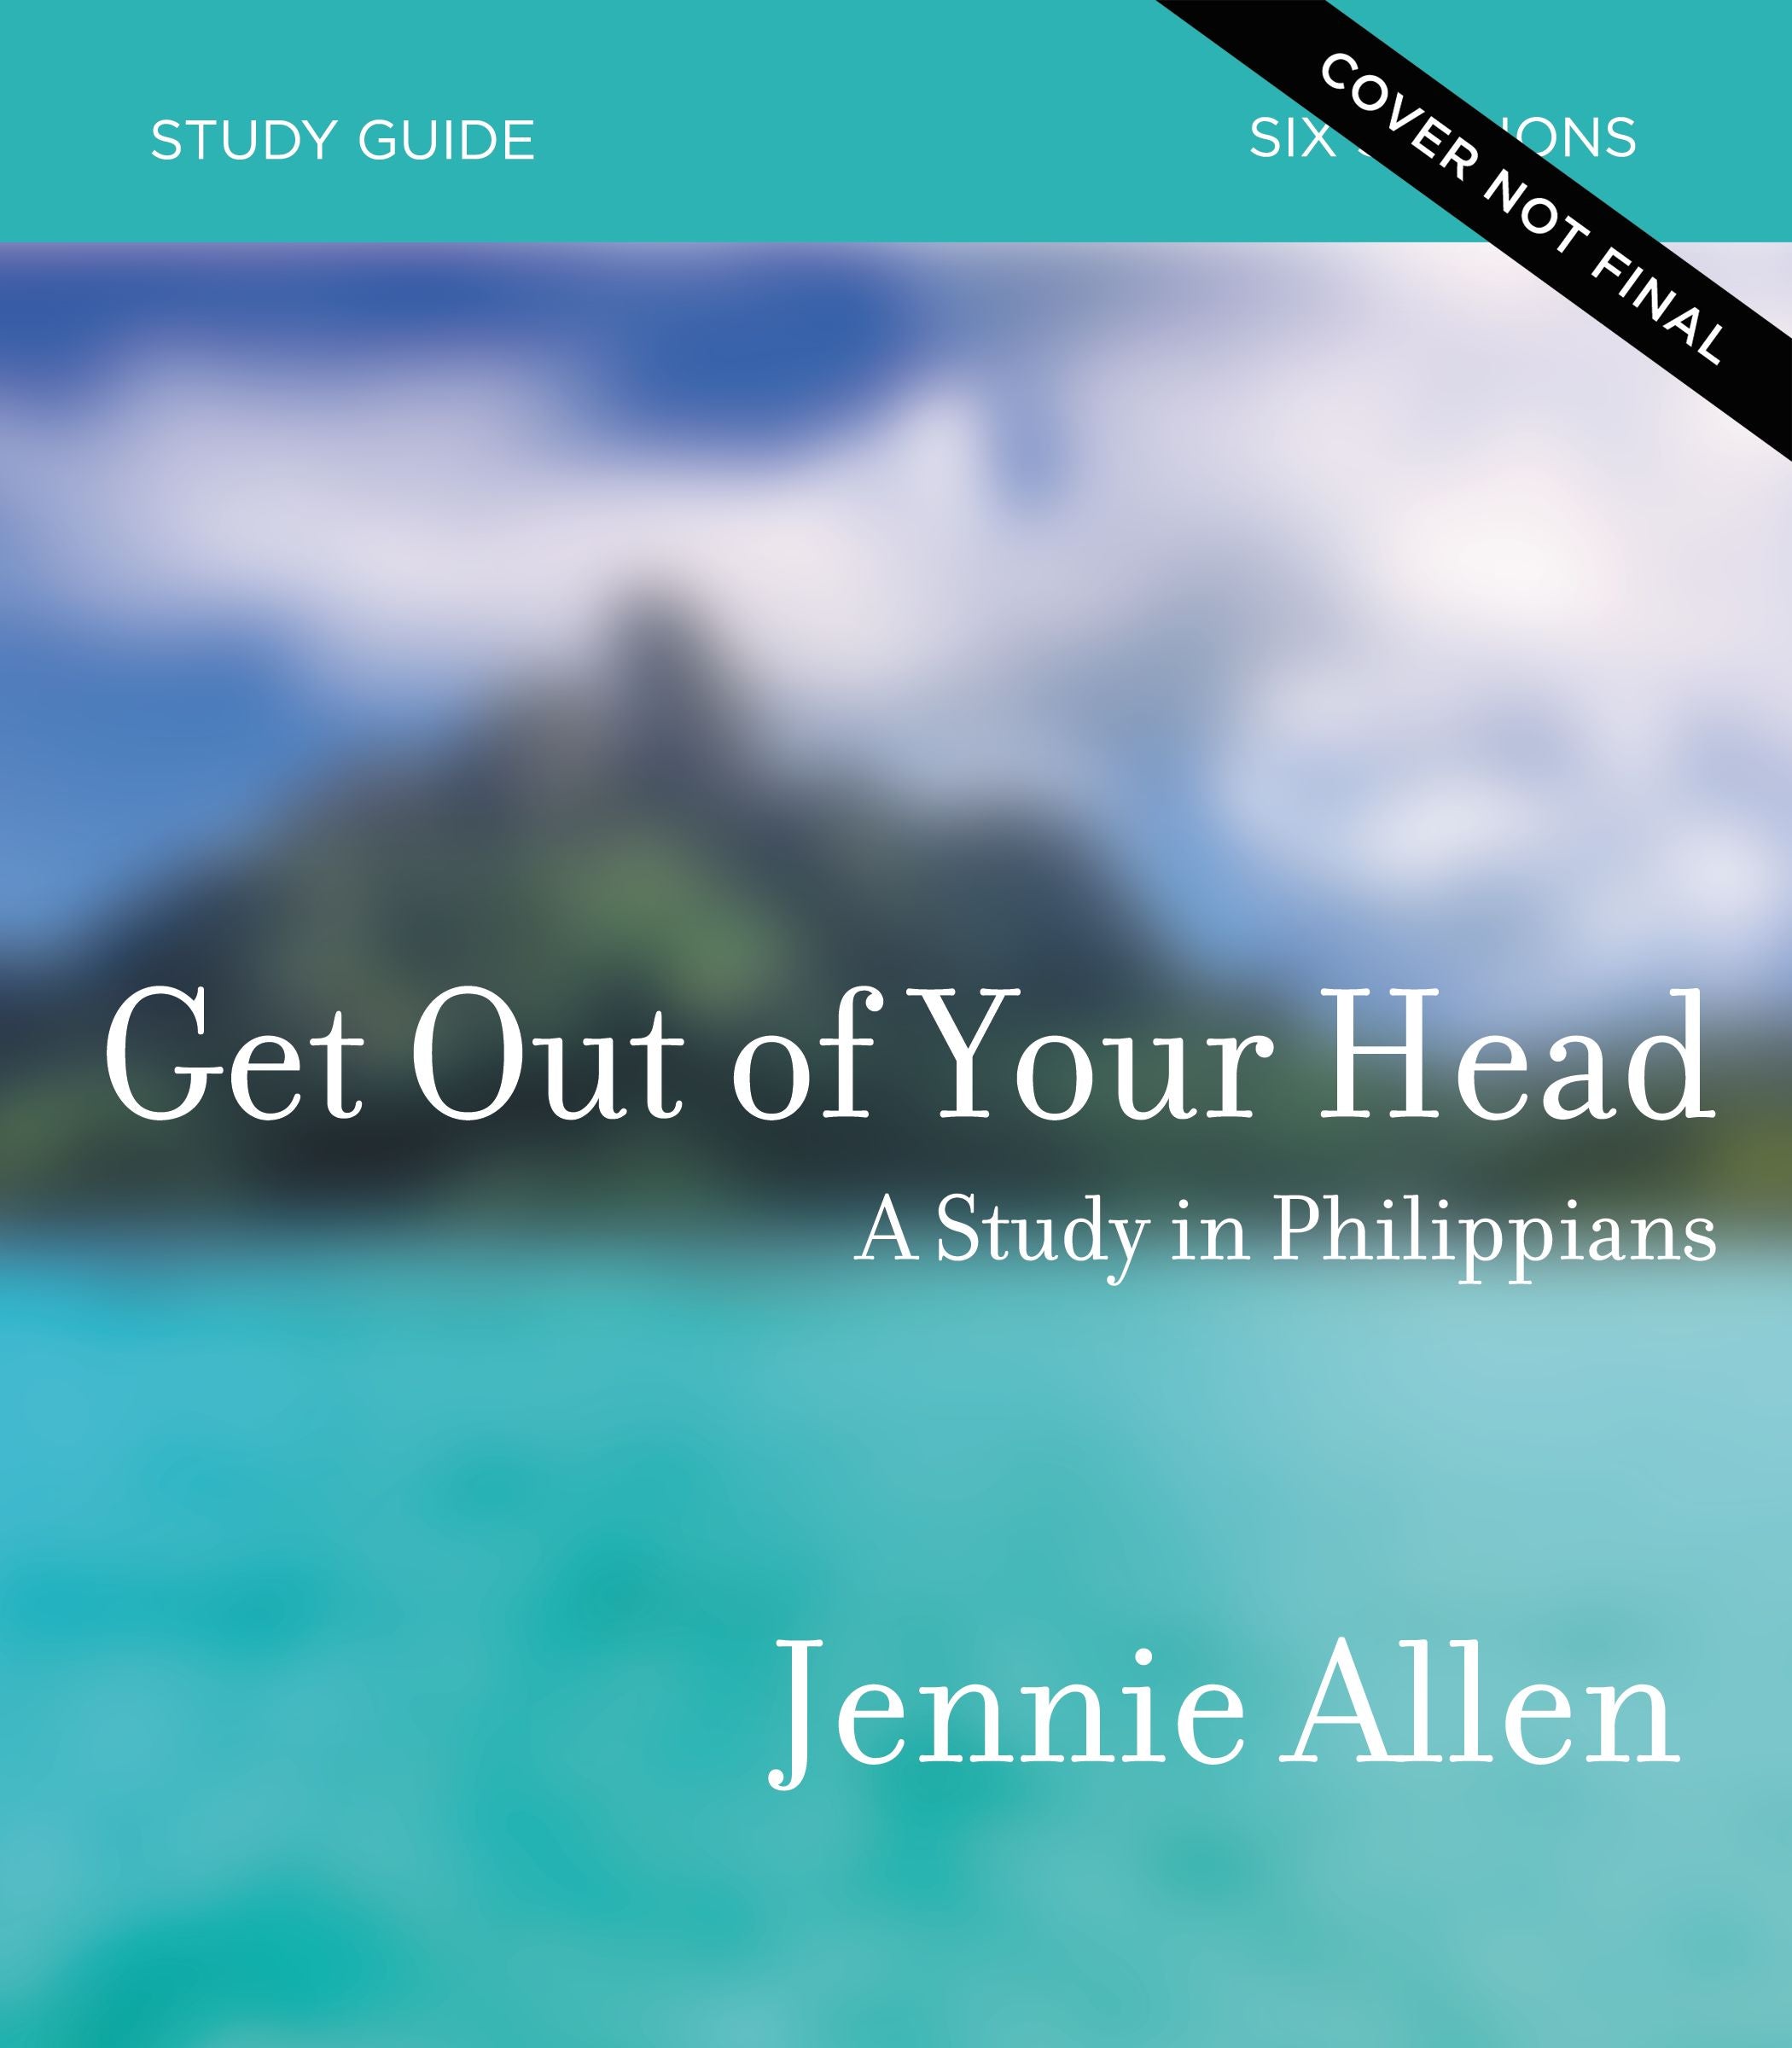 Image of Get Out of Your Head Study Guide other